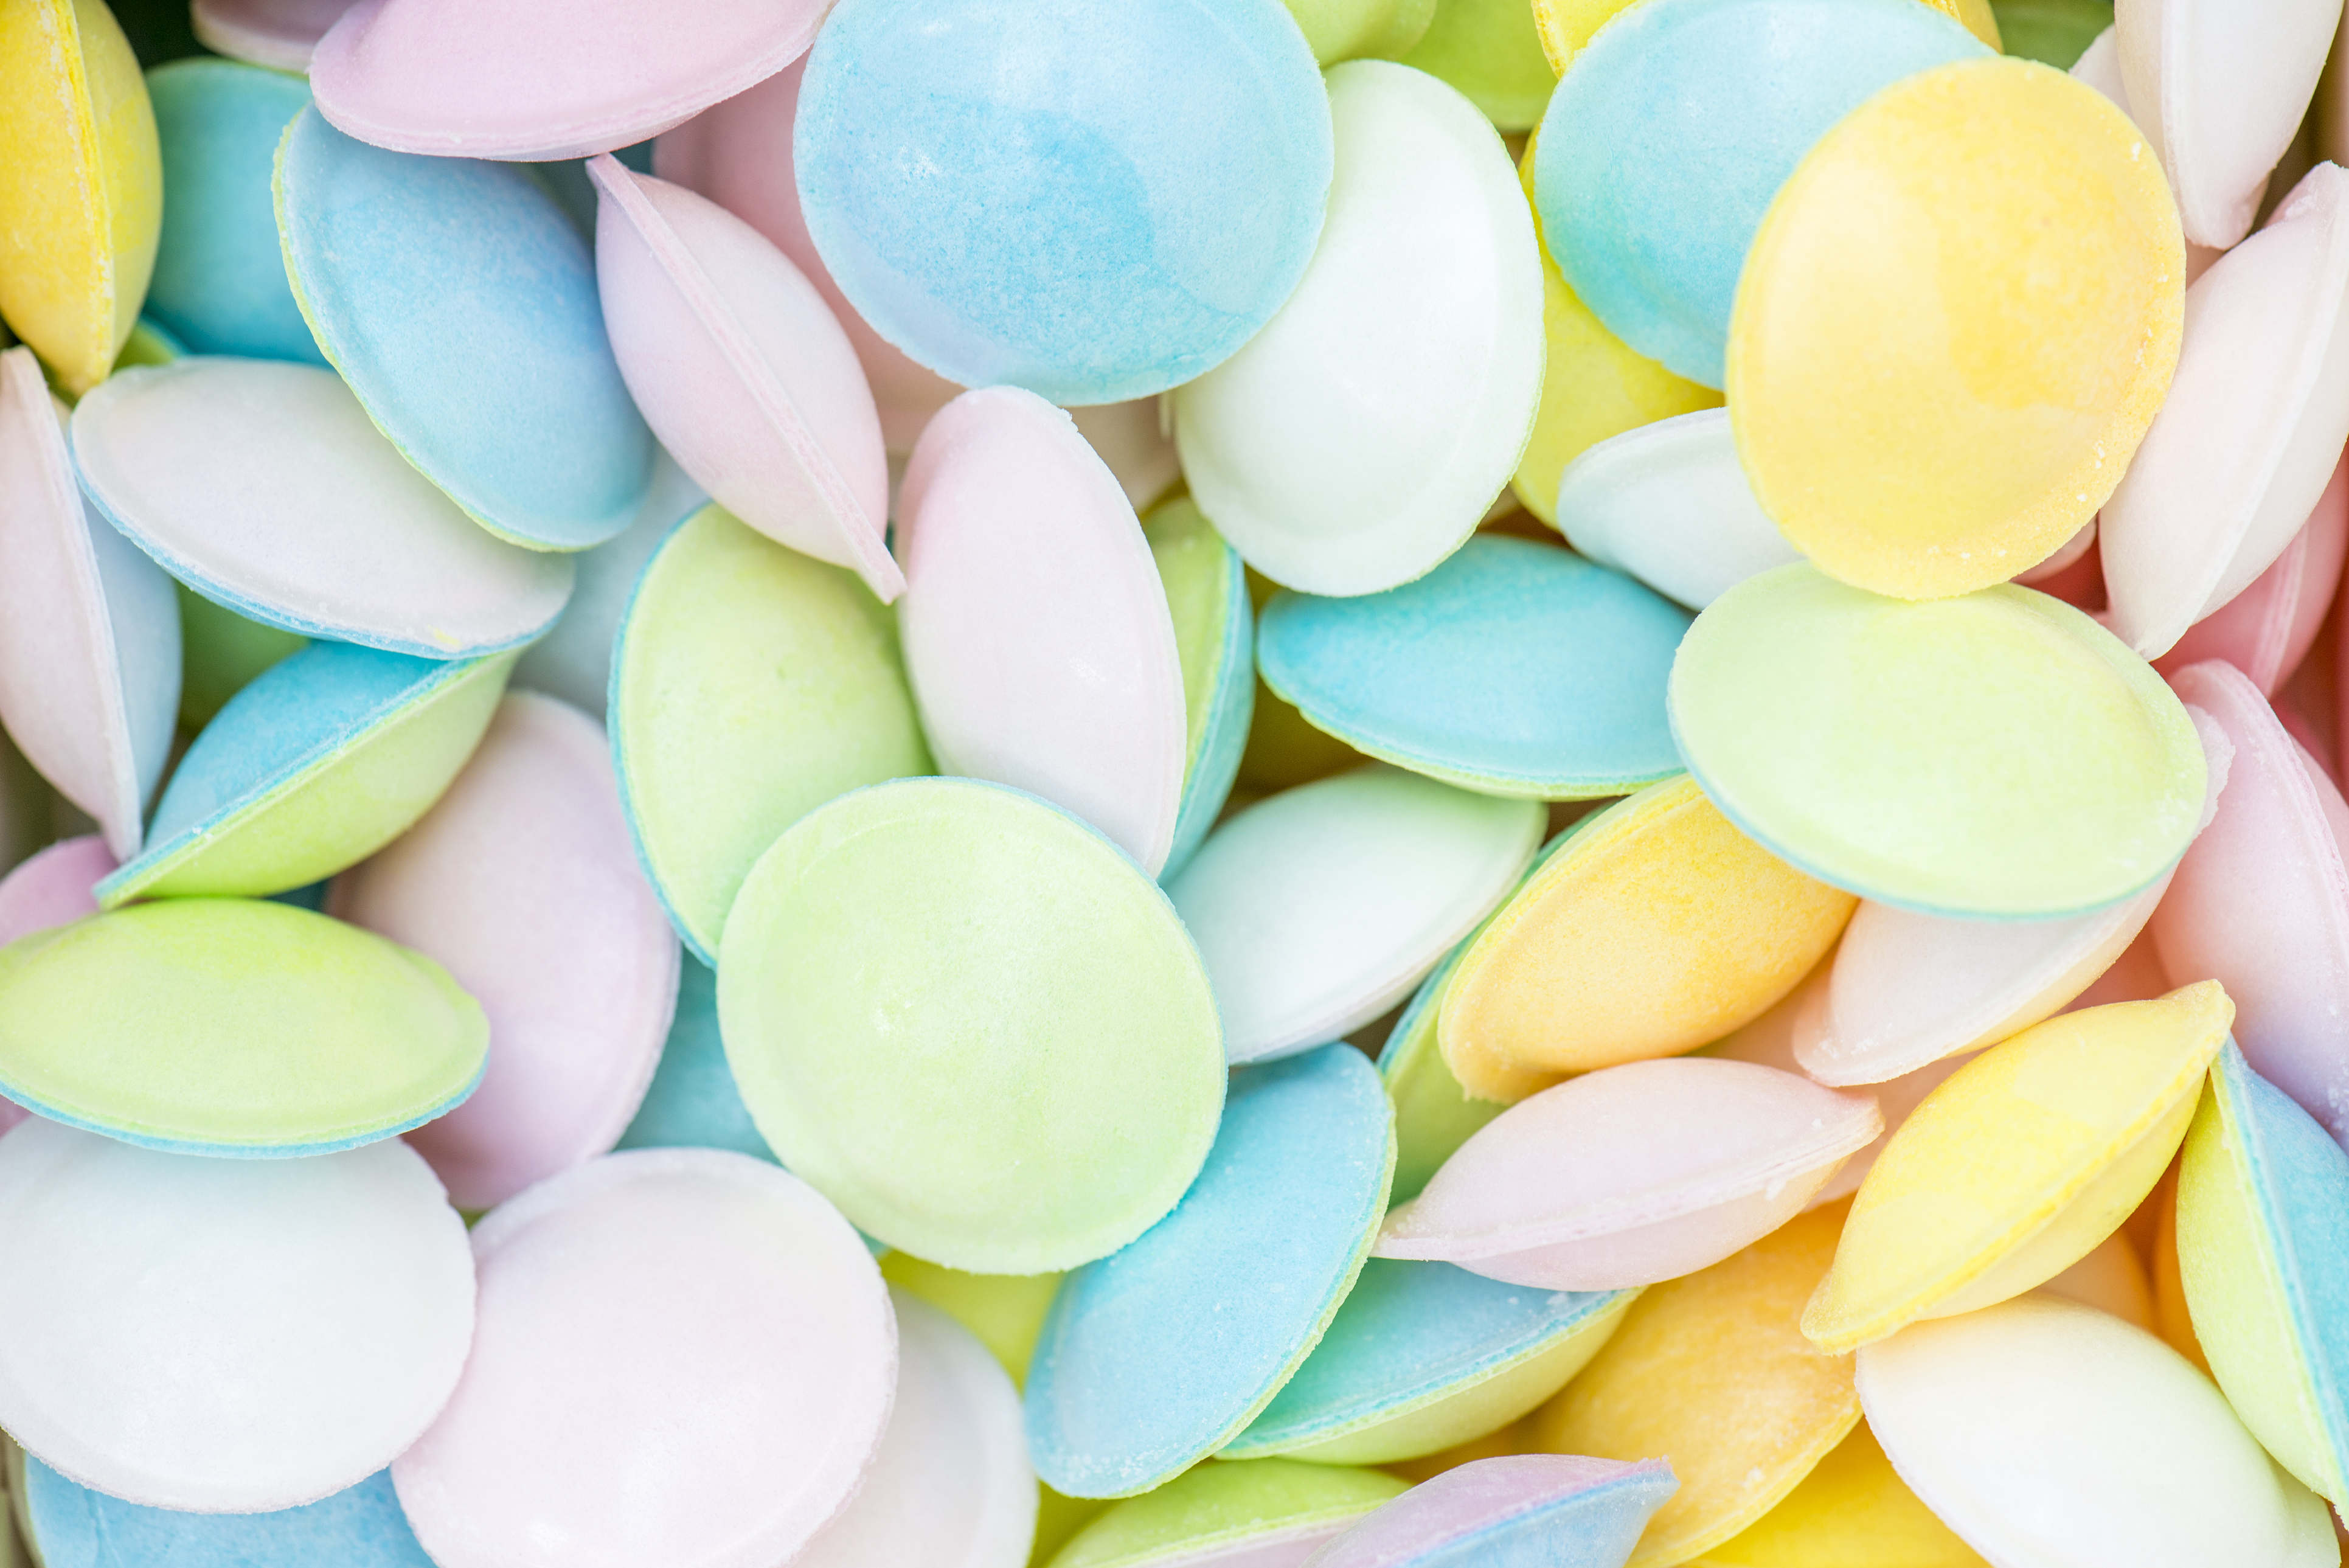 Flying saucers (Thinkstock/PA)